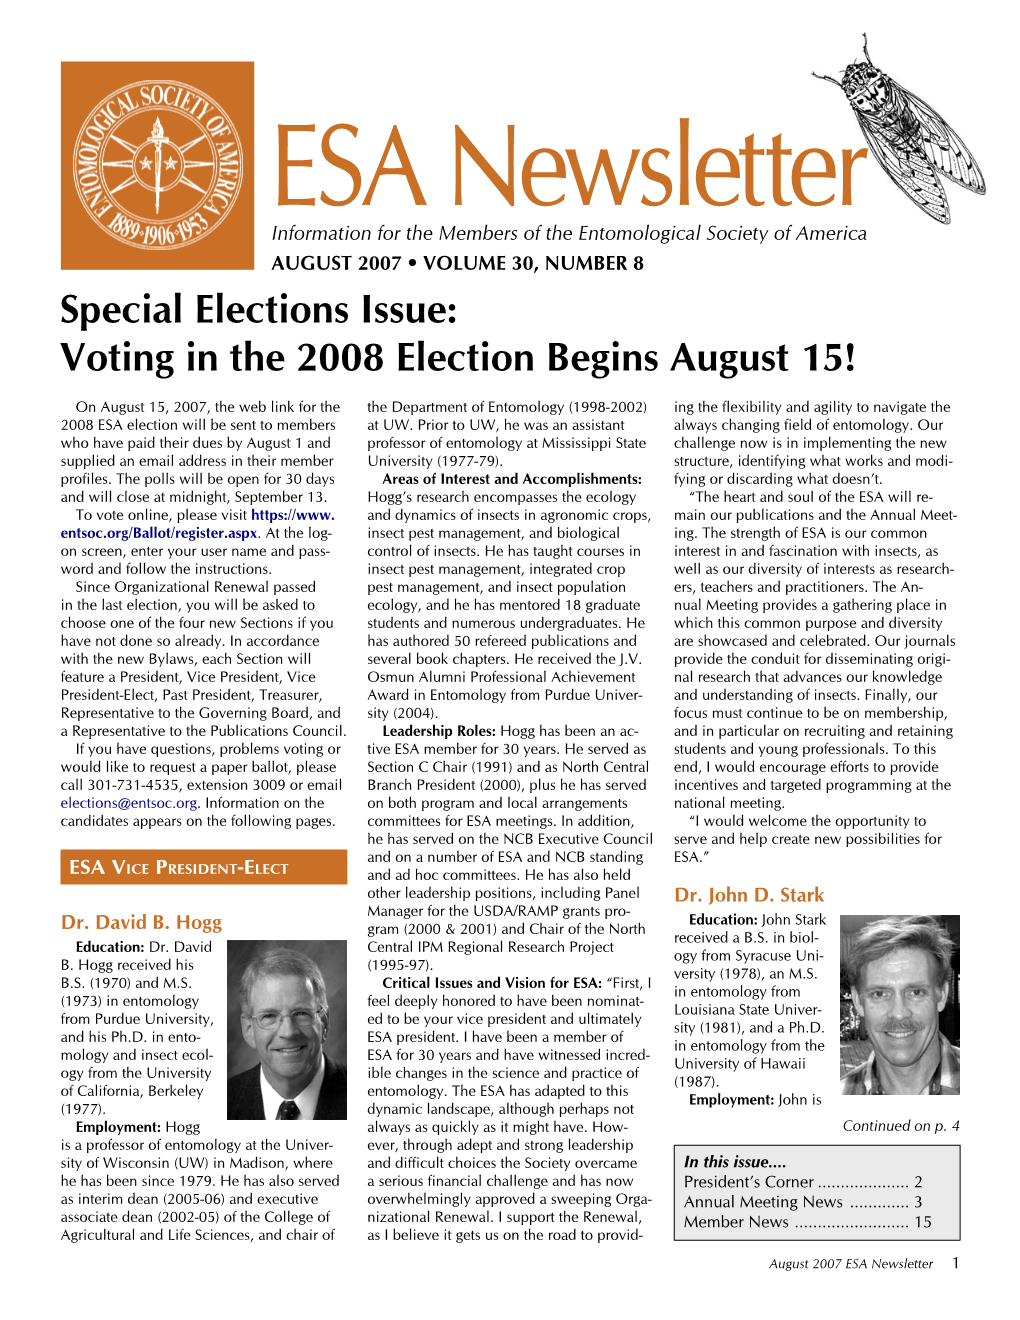 Special Elections Issue: Voting in the 2008 Election Begins August 15!